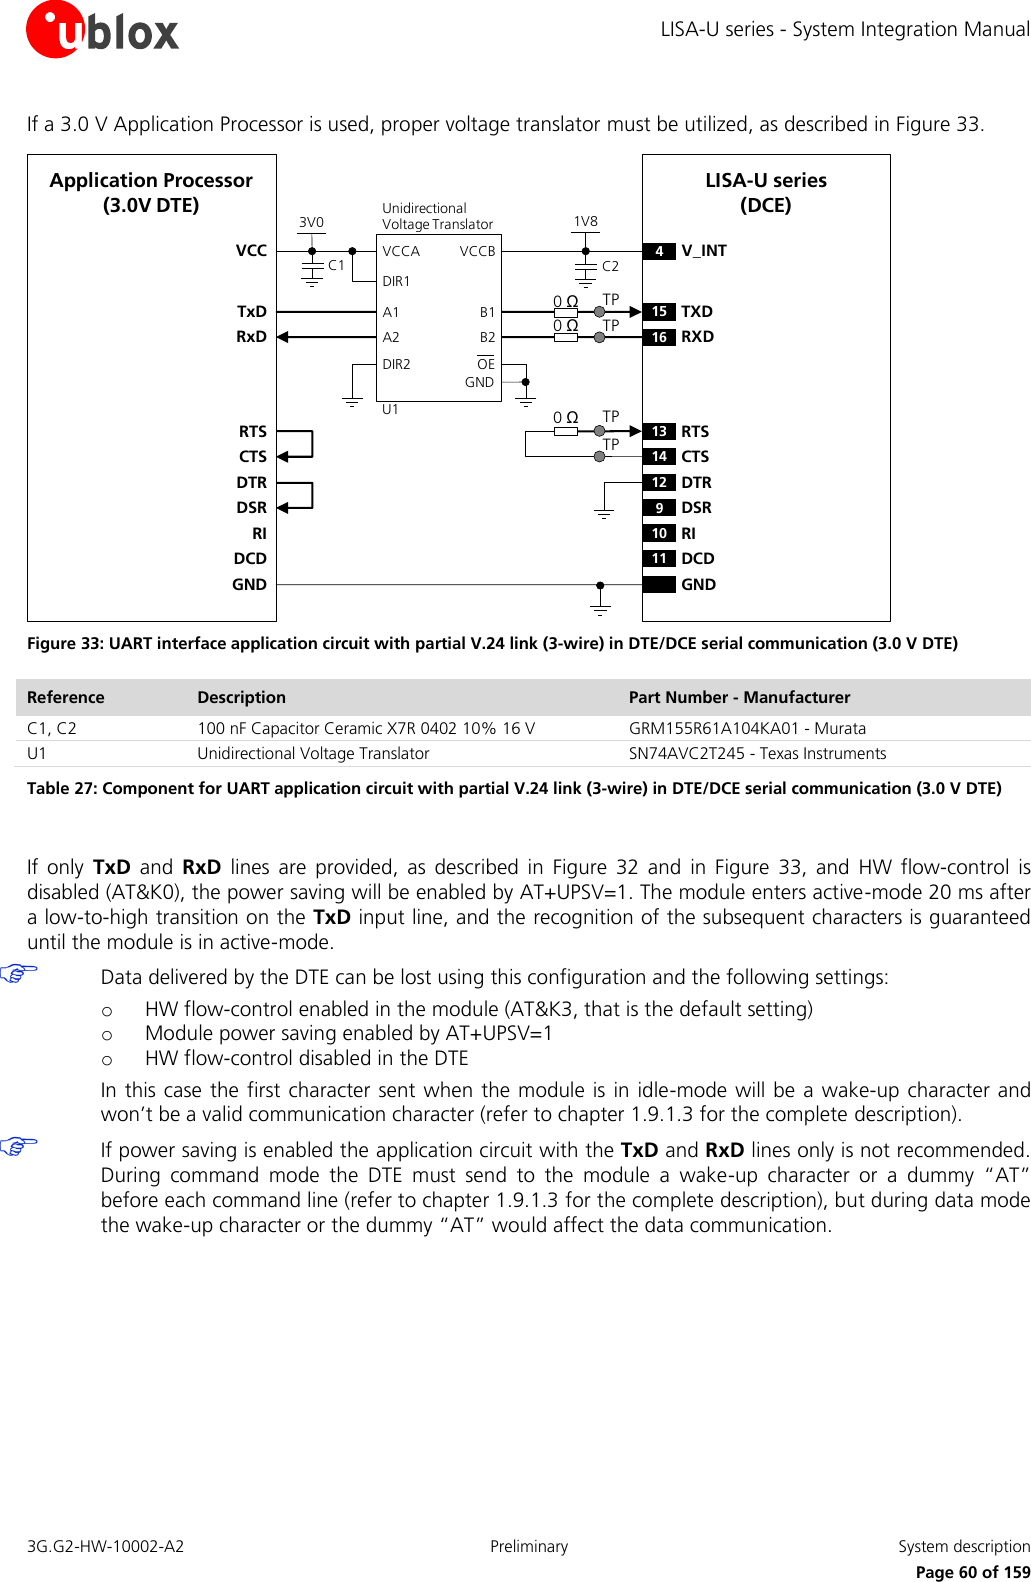 LISA-U series - System Integration Manual 3G.G2-HW-10002-A2  Preliminary  System description      Page 60 of 159 If a 3.0 V Application Processor is used, proper voltage translator must be utilized, as described in Figure 33. 4V_INTTxDApplication Processor(3.0V DTE)RxDDTRDSRRIDCDGNDLISA-U series (DCE)15 TXD12 DTR16 RXD9DSR10 RI11 DCDGND0 Ω0 ΩTPTP1V8B1 A1GNDU1VCCBVCCAUnidirectionalVoltage TranslatorC1 C23V0DIR1DIR2 OEVCCB2 A2RTSCTS13 RTS14 CTS0 ΩTPTP Figure 33: UART interface application circuit with partial V.24 link (3-wire) in DTE/DCE serial communication (3.0 V DTE) Reference Description Part Number - Manufacturer C1, C2 100 nF Capacitor Ceramic X7R 0402 10% 16 V GRM155R61A104KA01 - Murata U1 Unidirectional Voltage Translator SN74AVC2T245 - Texas Instruments Table 27: Component for UART application circuit with partial V.24 link (3-wire) in DTE/DCE serial communication (3.0 V DTE)  If  only  TxD  and  RxD  lines  are  provided,  as  described  in  Figure  32  and  in  Figure  33,  and  HW  flow-control  is disabled (AT&amp;K0), the power saving will be enabled by AT+UPSV=1. The module enters active-mode 20 ms after a low-to-high transition on the TxD input line, and the recognition of the subsequent characters is guaranteed until the module is in active-mode.  Data delivered by the DTE can be lost using this configuration and the following settings: o HW flow-control enabled in the module (AT&amp;K3, that is the default setting) o Module power saving enabled by AT+UPSV=1 o HW flow-control disabled in the DTE In this case the first character sent when the  module is  in idle-mode will be a  wake-up character and won’t be a valid communication character (refer to chapter 1.9.1.3 for the complete description).  If power saving is enabled the application circuit with the TxD and RxD lines only is not recommended. During  command  mode  the  DTE  must  send  to  the  module  a  wake-up  character  or  a  dummy  “AT” before each command line (refer to chapter 1.9.1.3 for the complete description), but during data mode the wake-up character or the dummy “AT” would affect the data communication.  